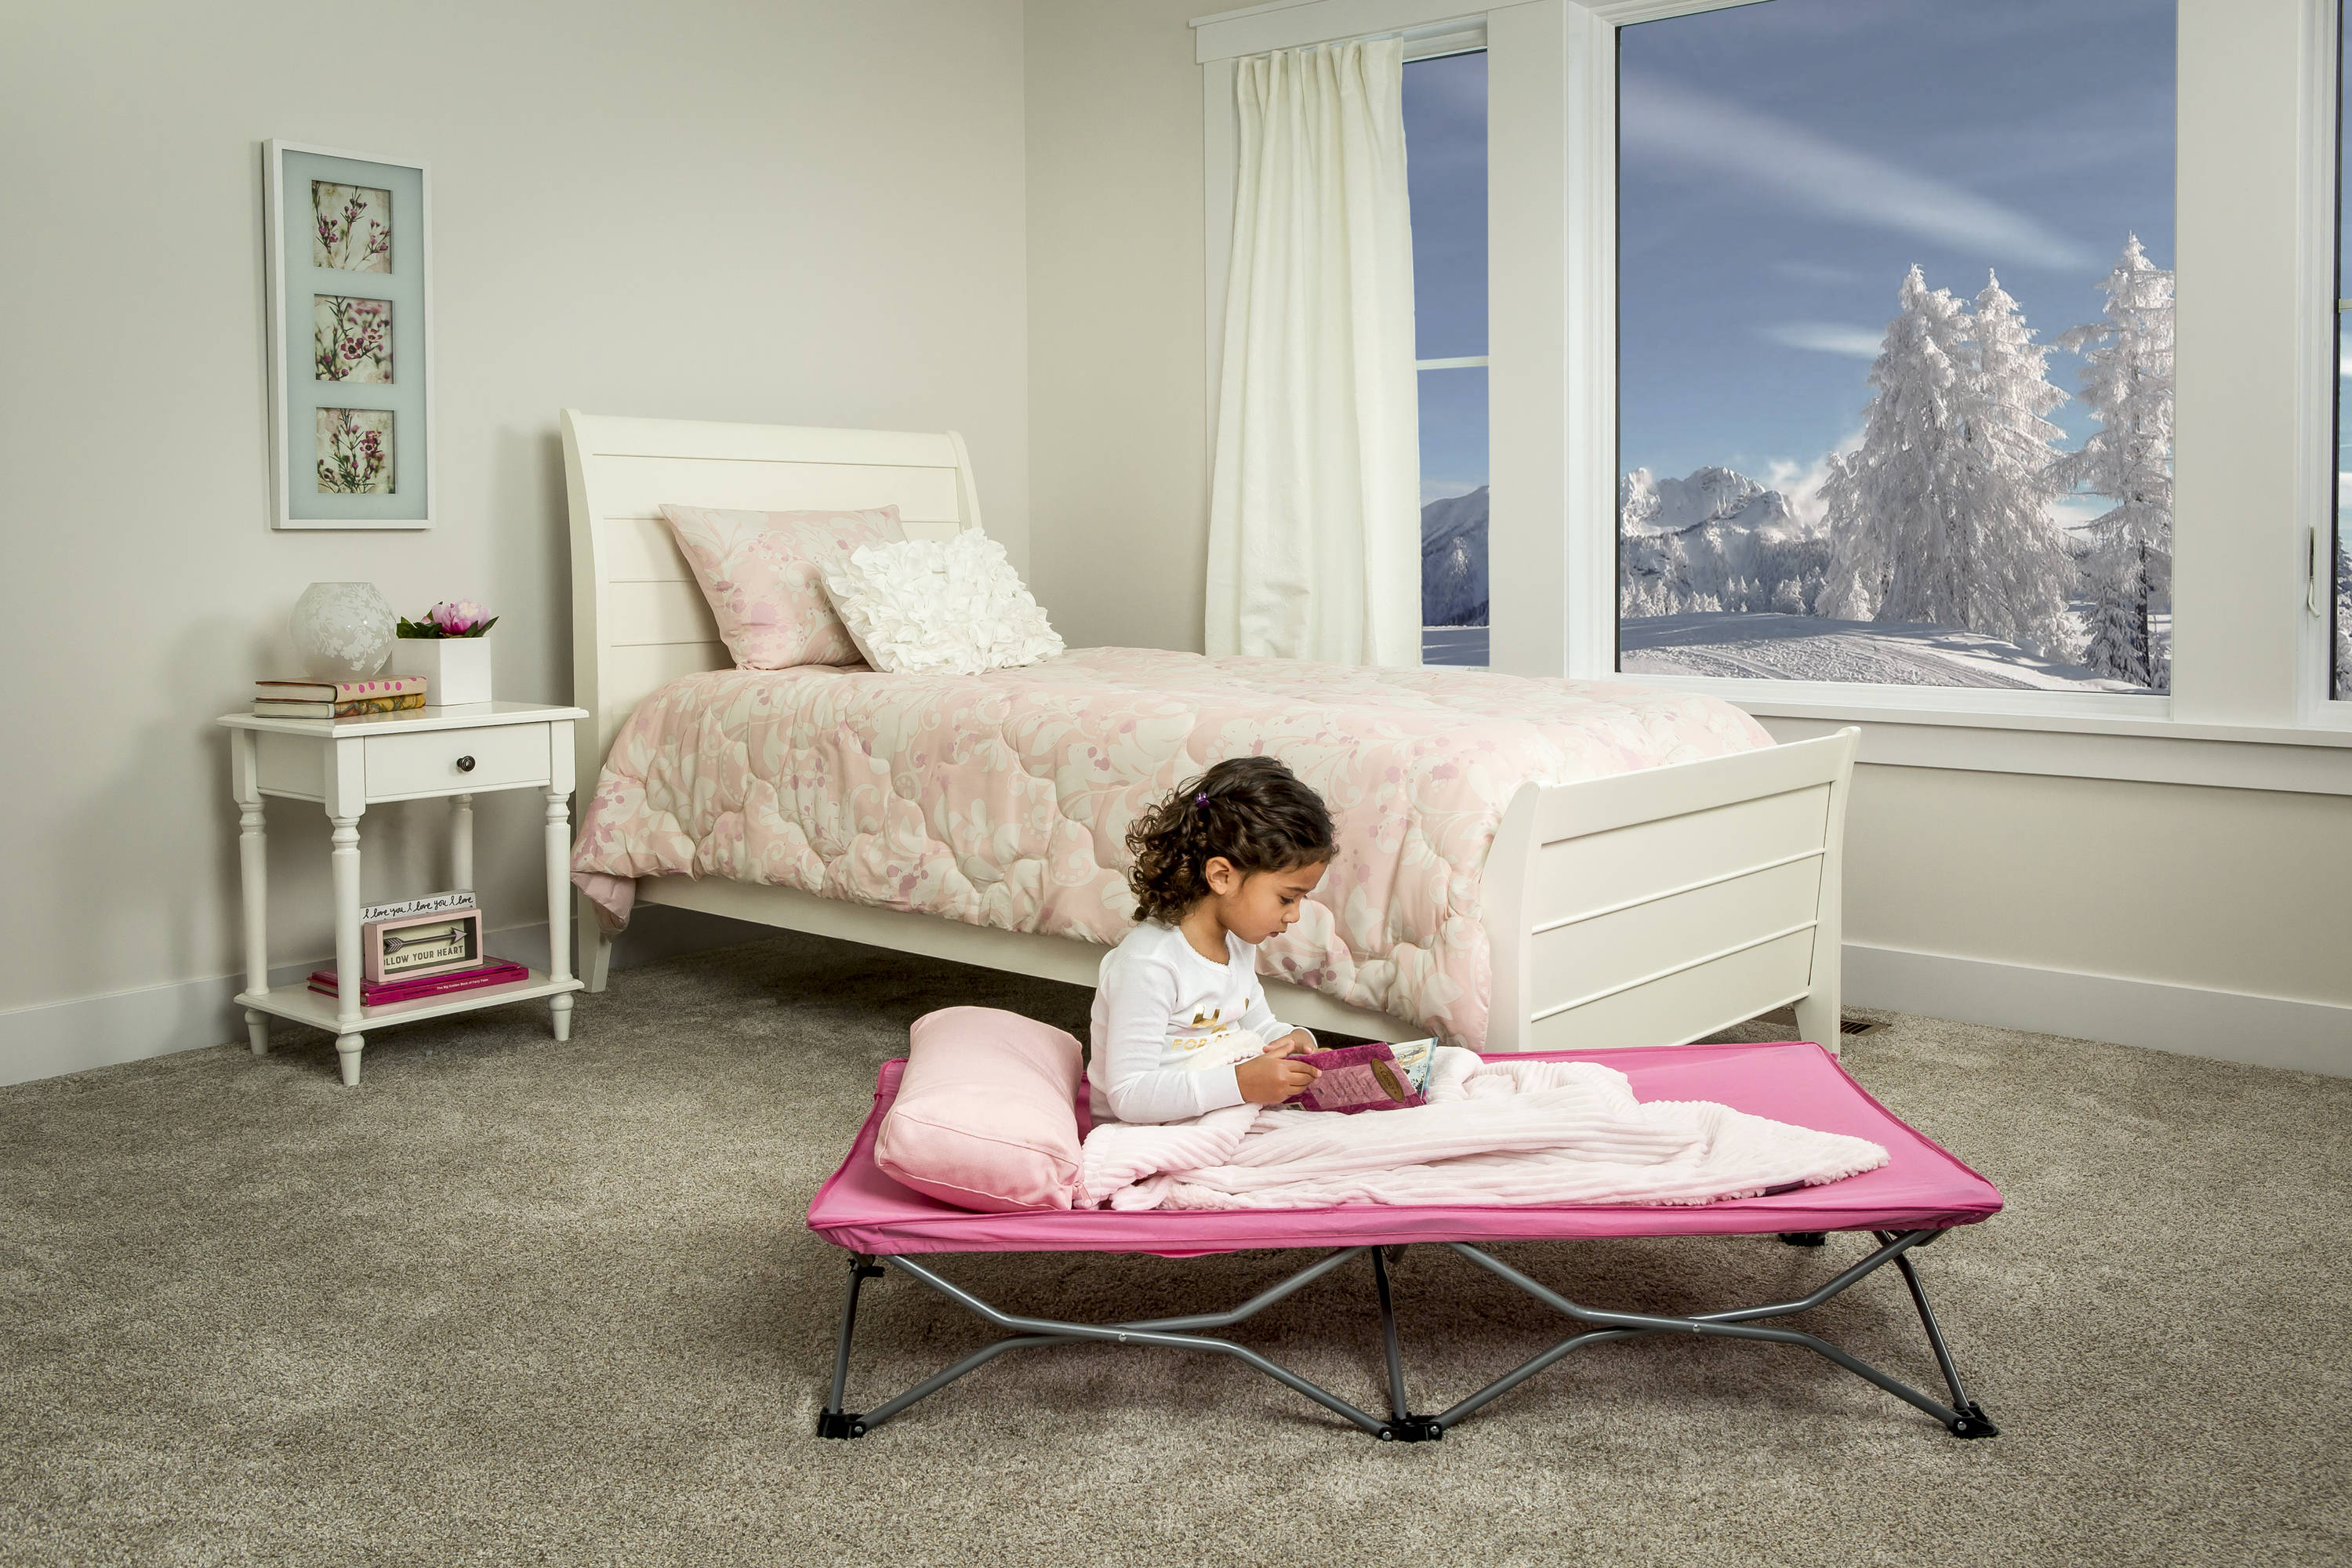 Pink Portable My Cot - Modern Toddler Bed for Ages 2-5, Steel Frame, JPMA Certified, Medium Pink Shade, Lightweight Finish | - Regalo 5005 DS